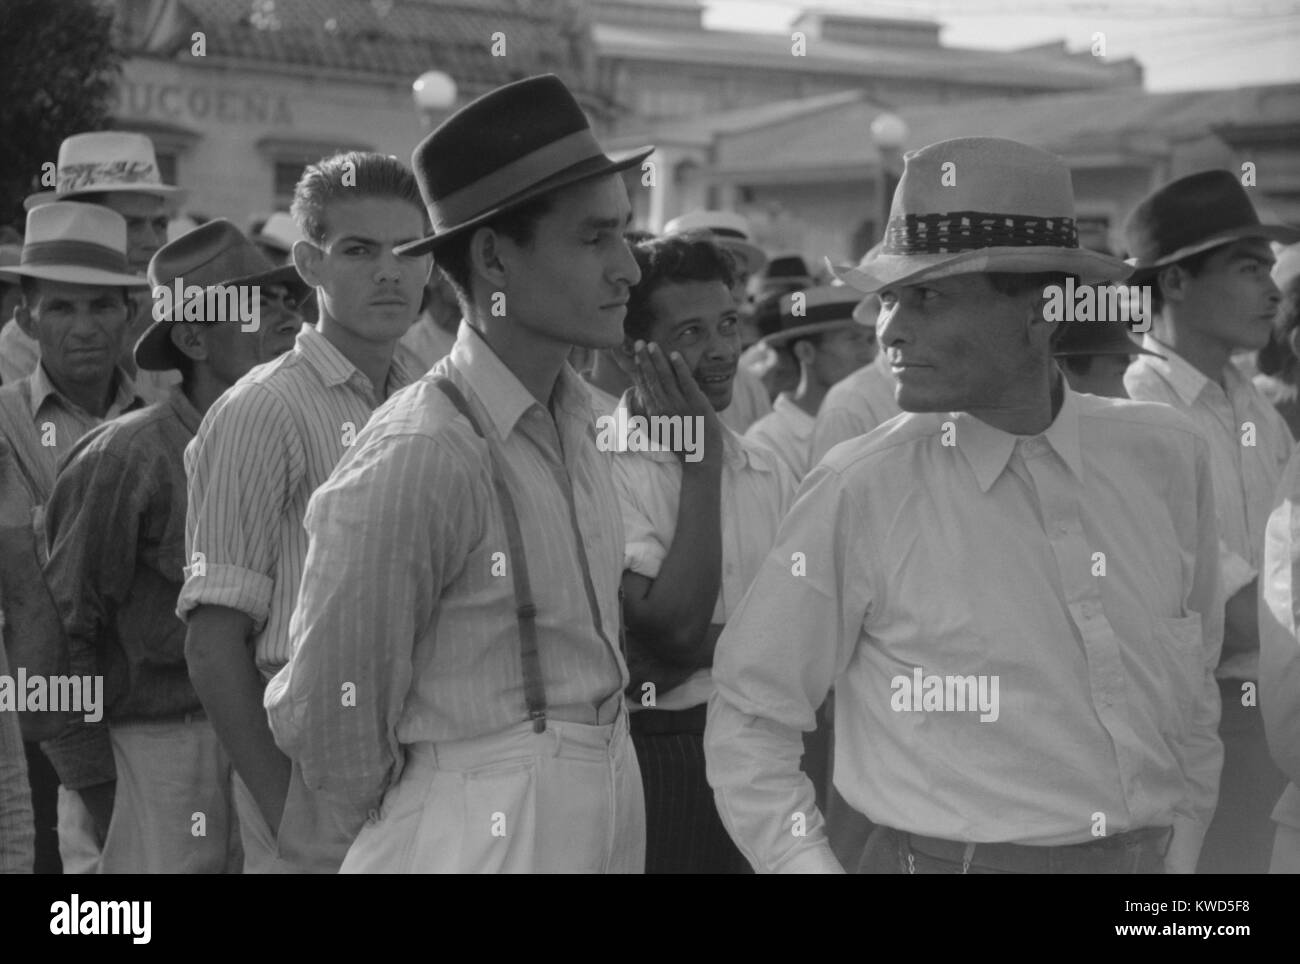 Men at a strike meeting in Yabucoa, Puerto Rico. Jan. 1942. Photo by Jack Delano. (BSLOC 2014 13 130) Stock Photo